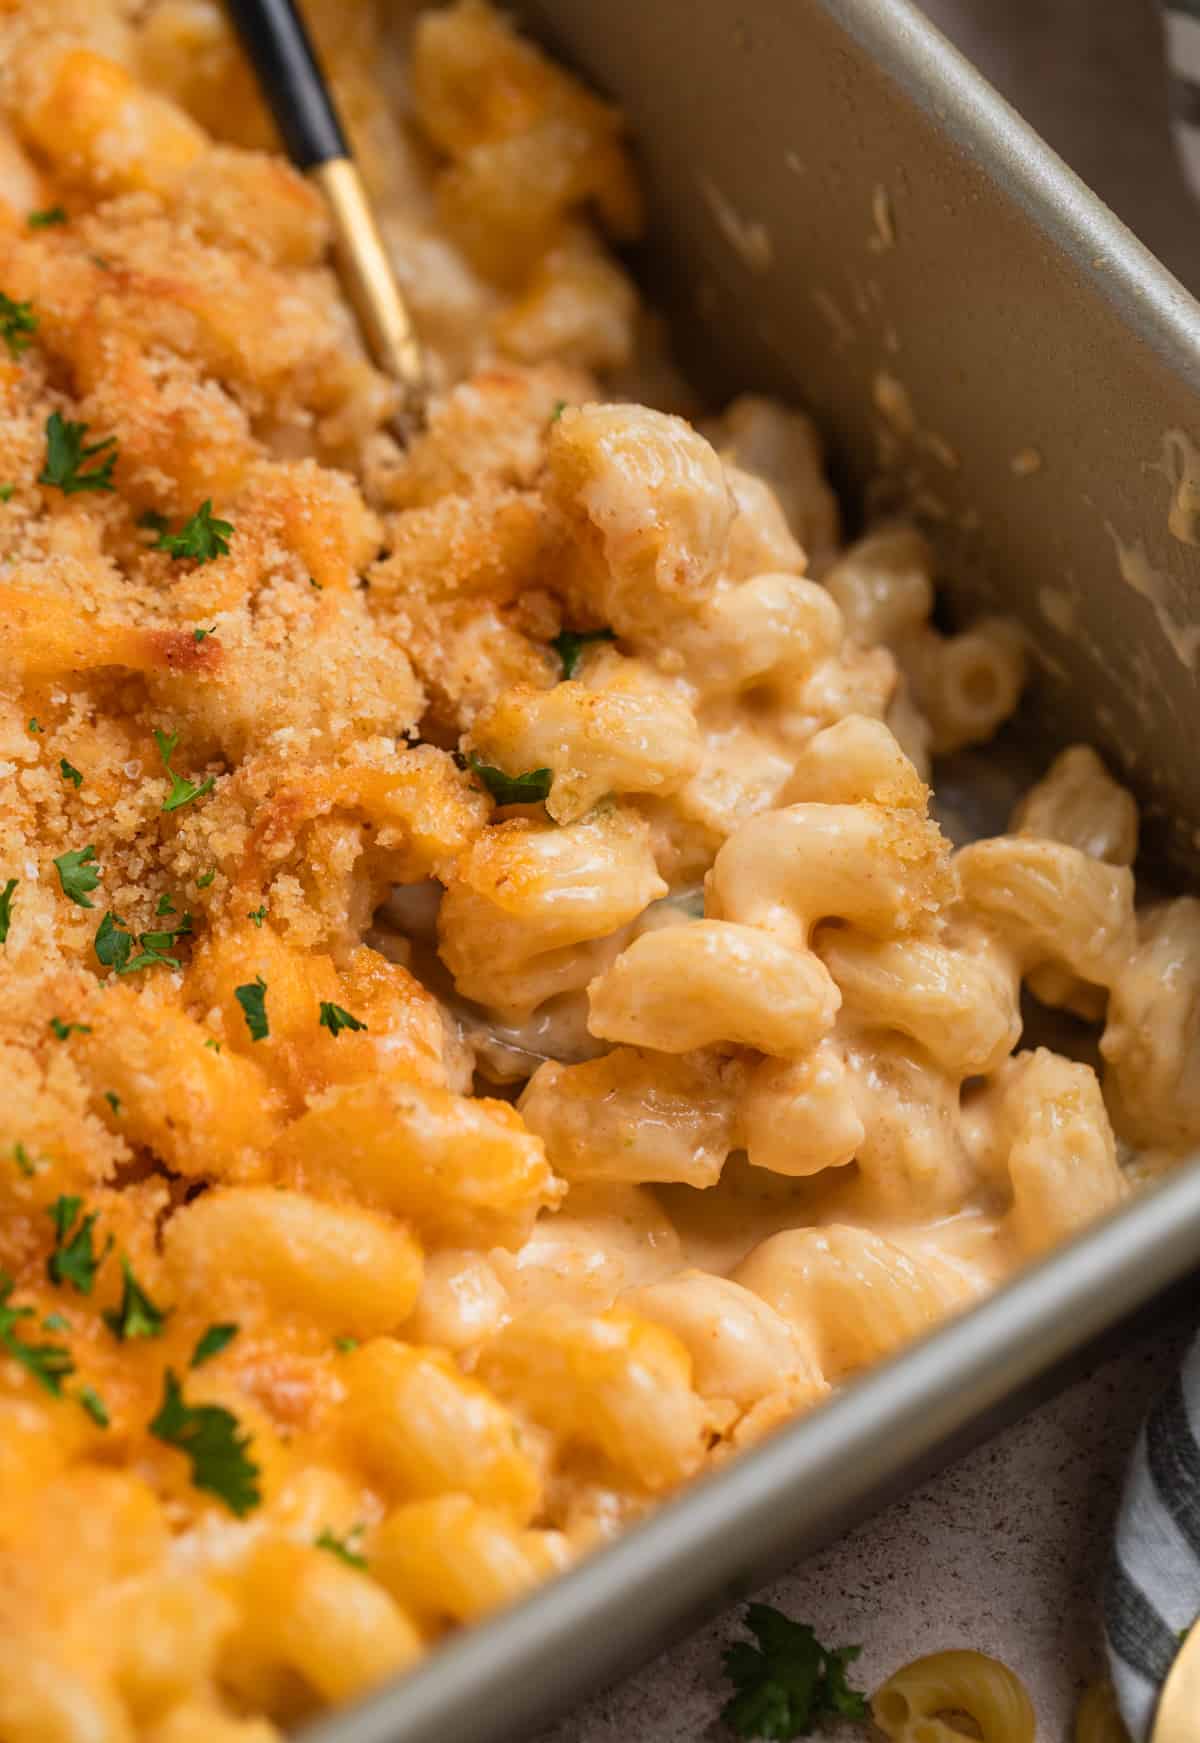 Pan with baked gruyere mac and cheese and spoon scooping in.